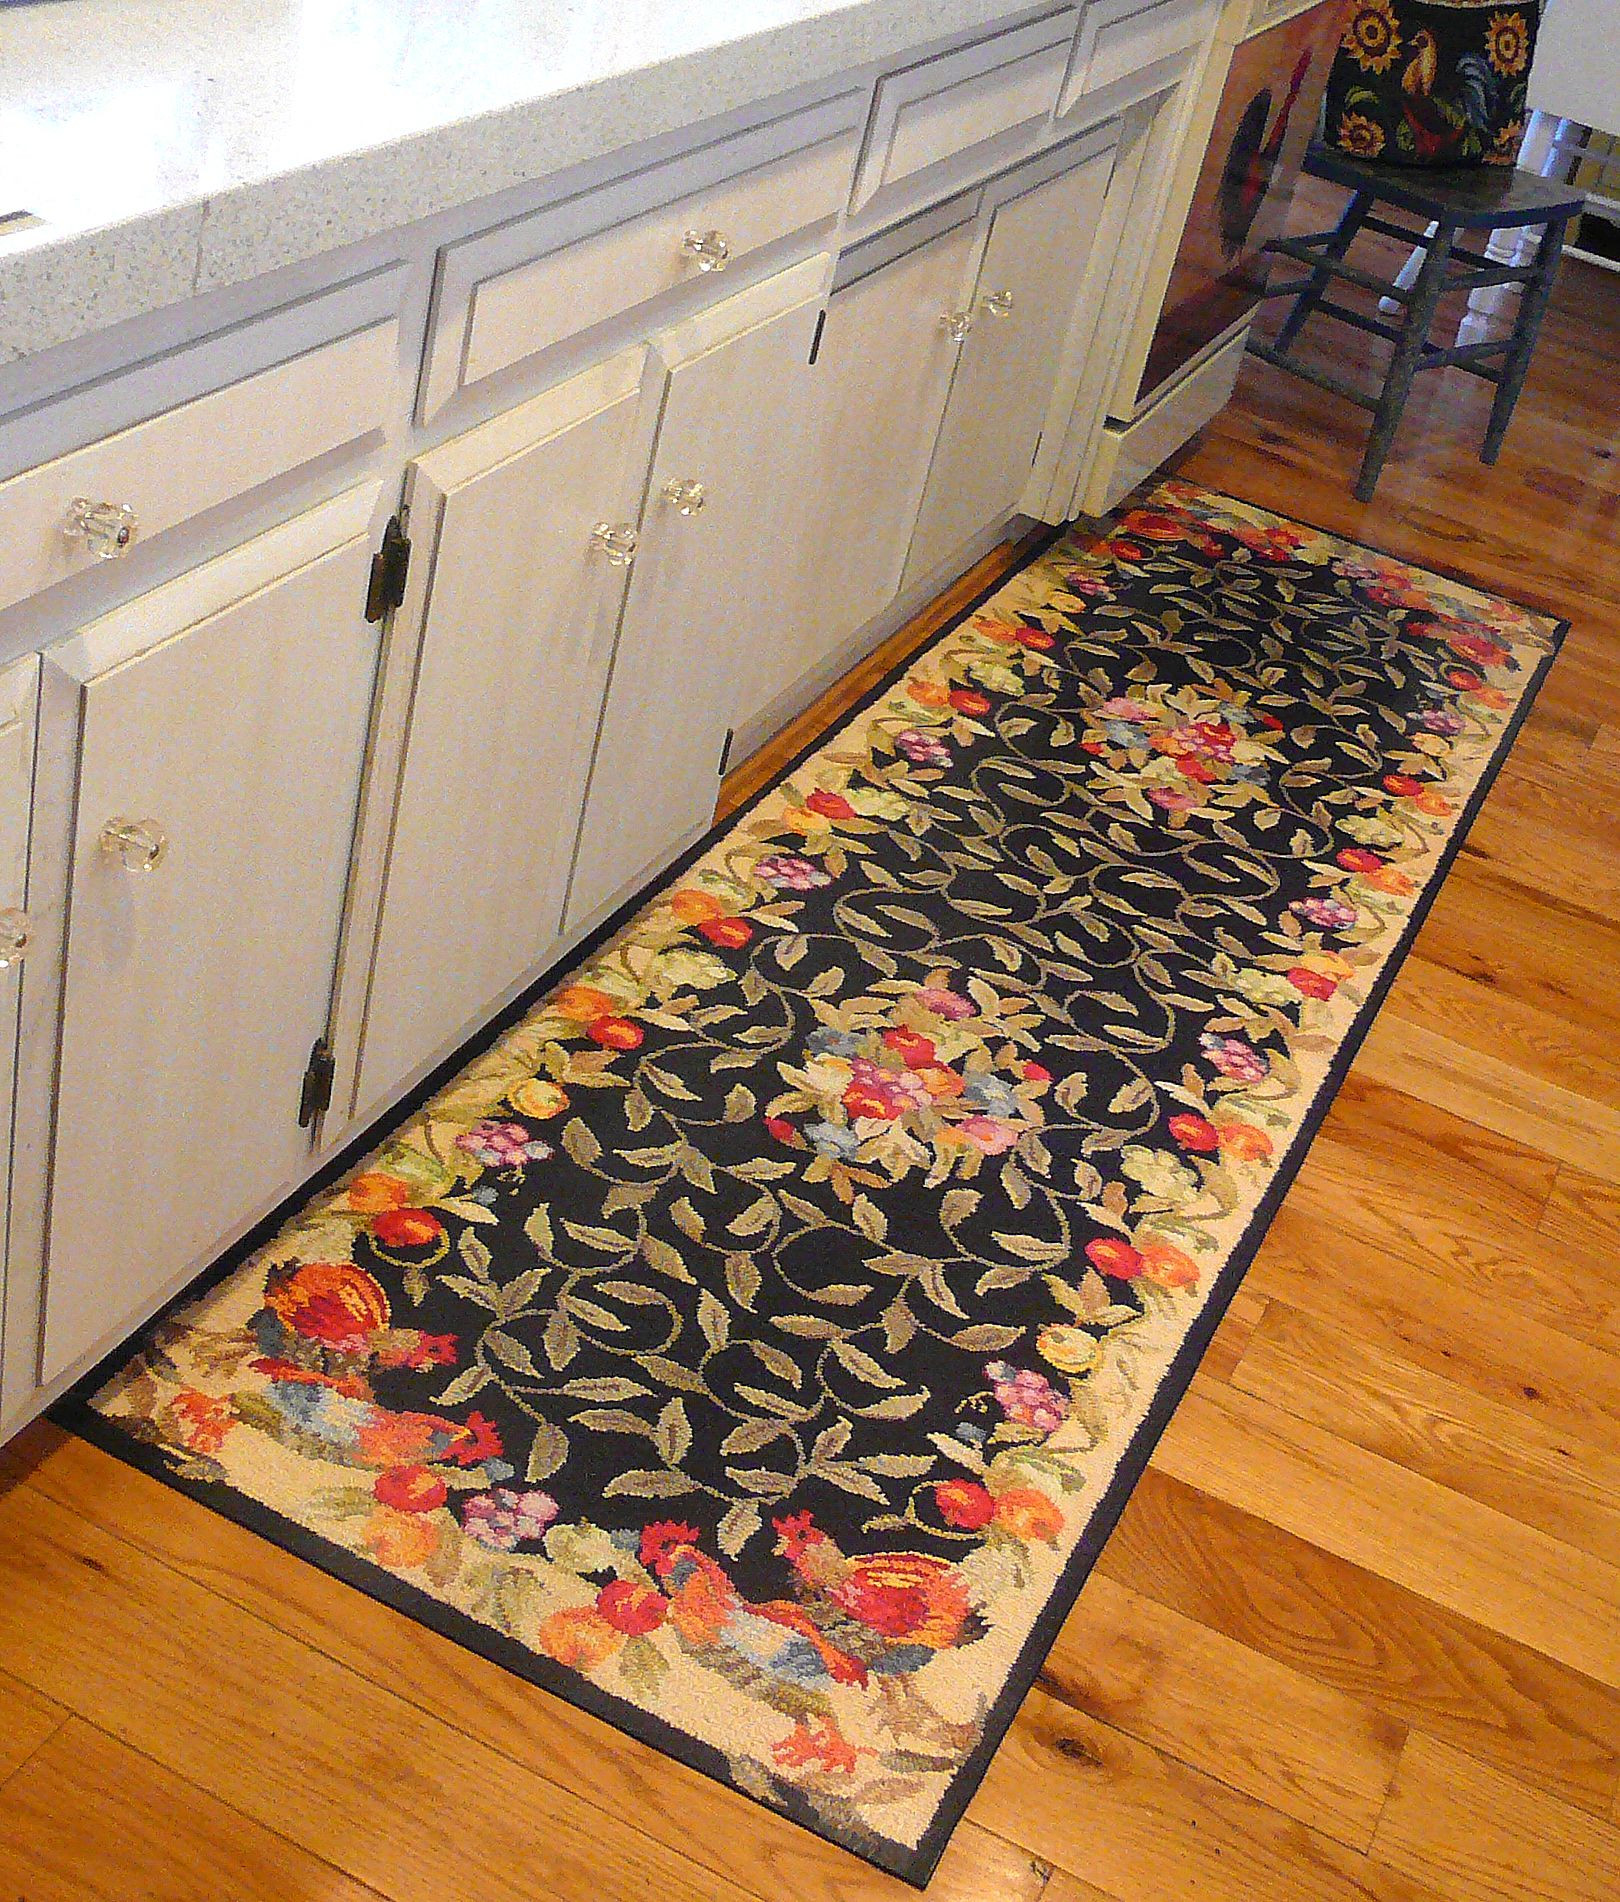 Area Rugs For Kitchen Floor
 Custom Made Floor Mats this is not a rug it s a painted